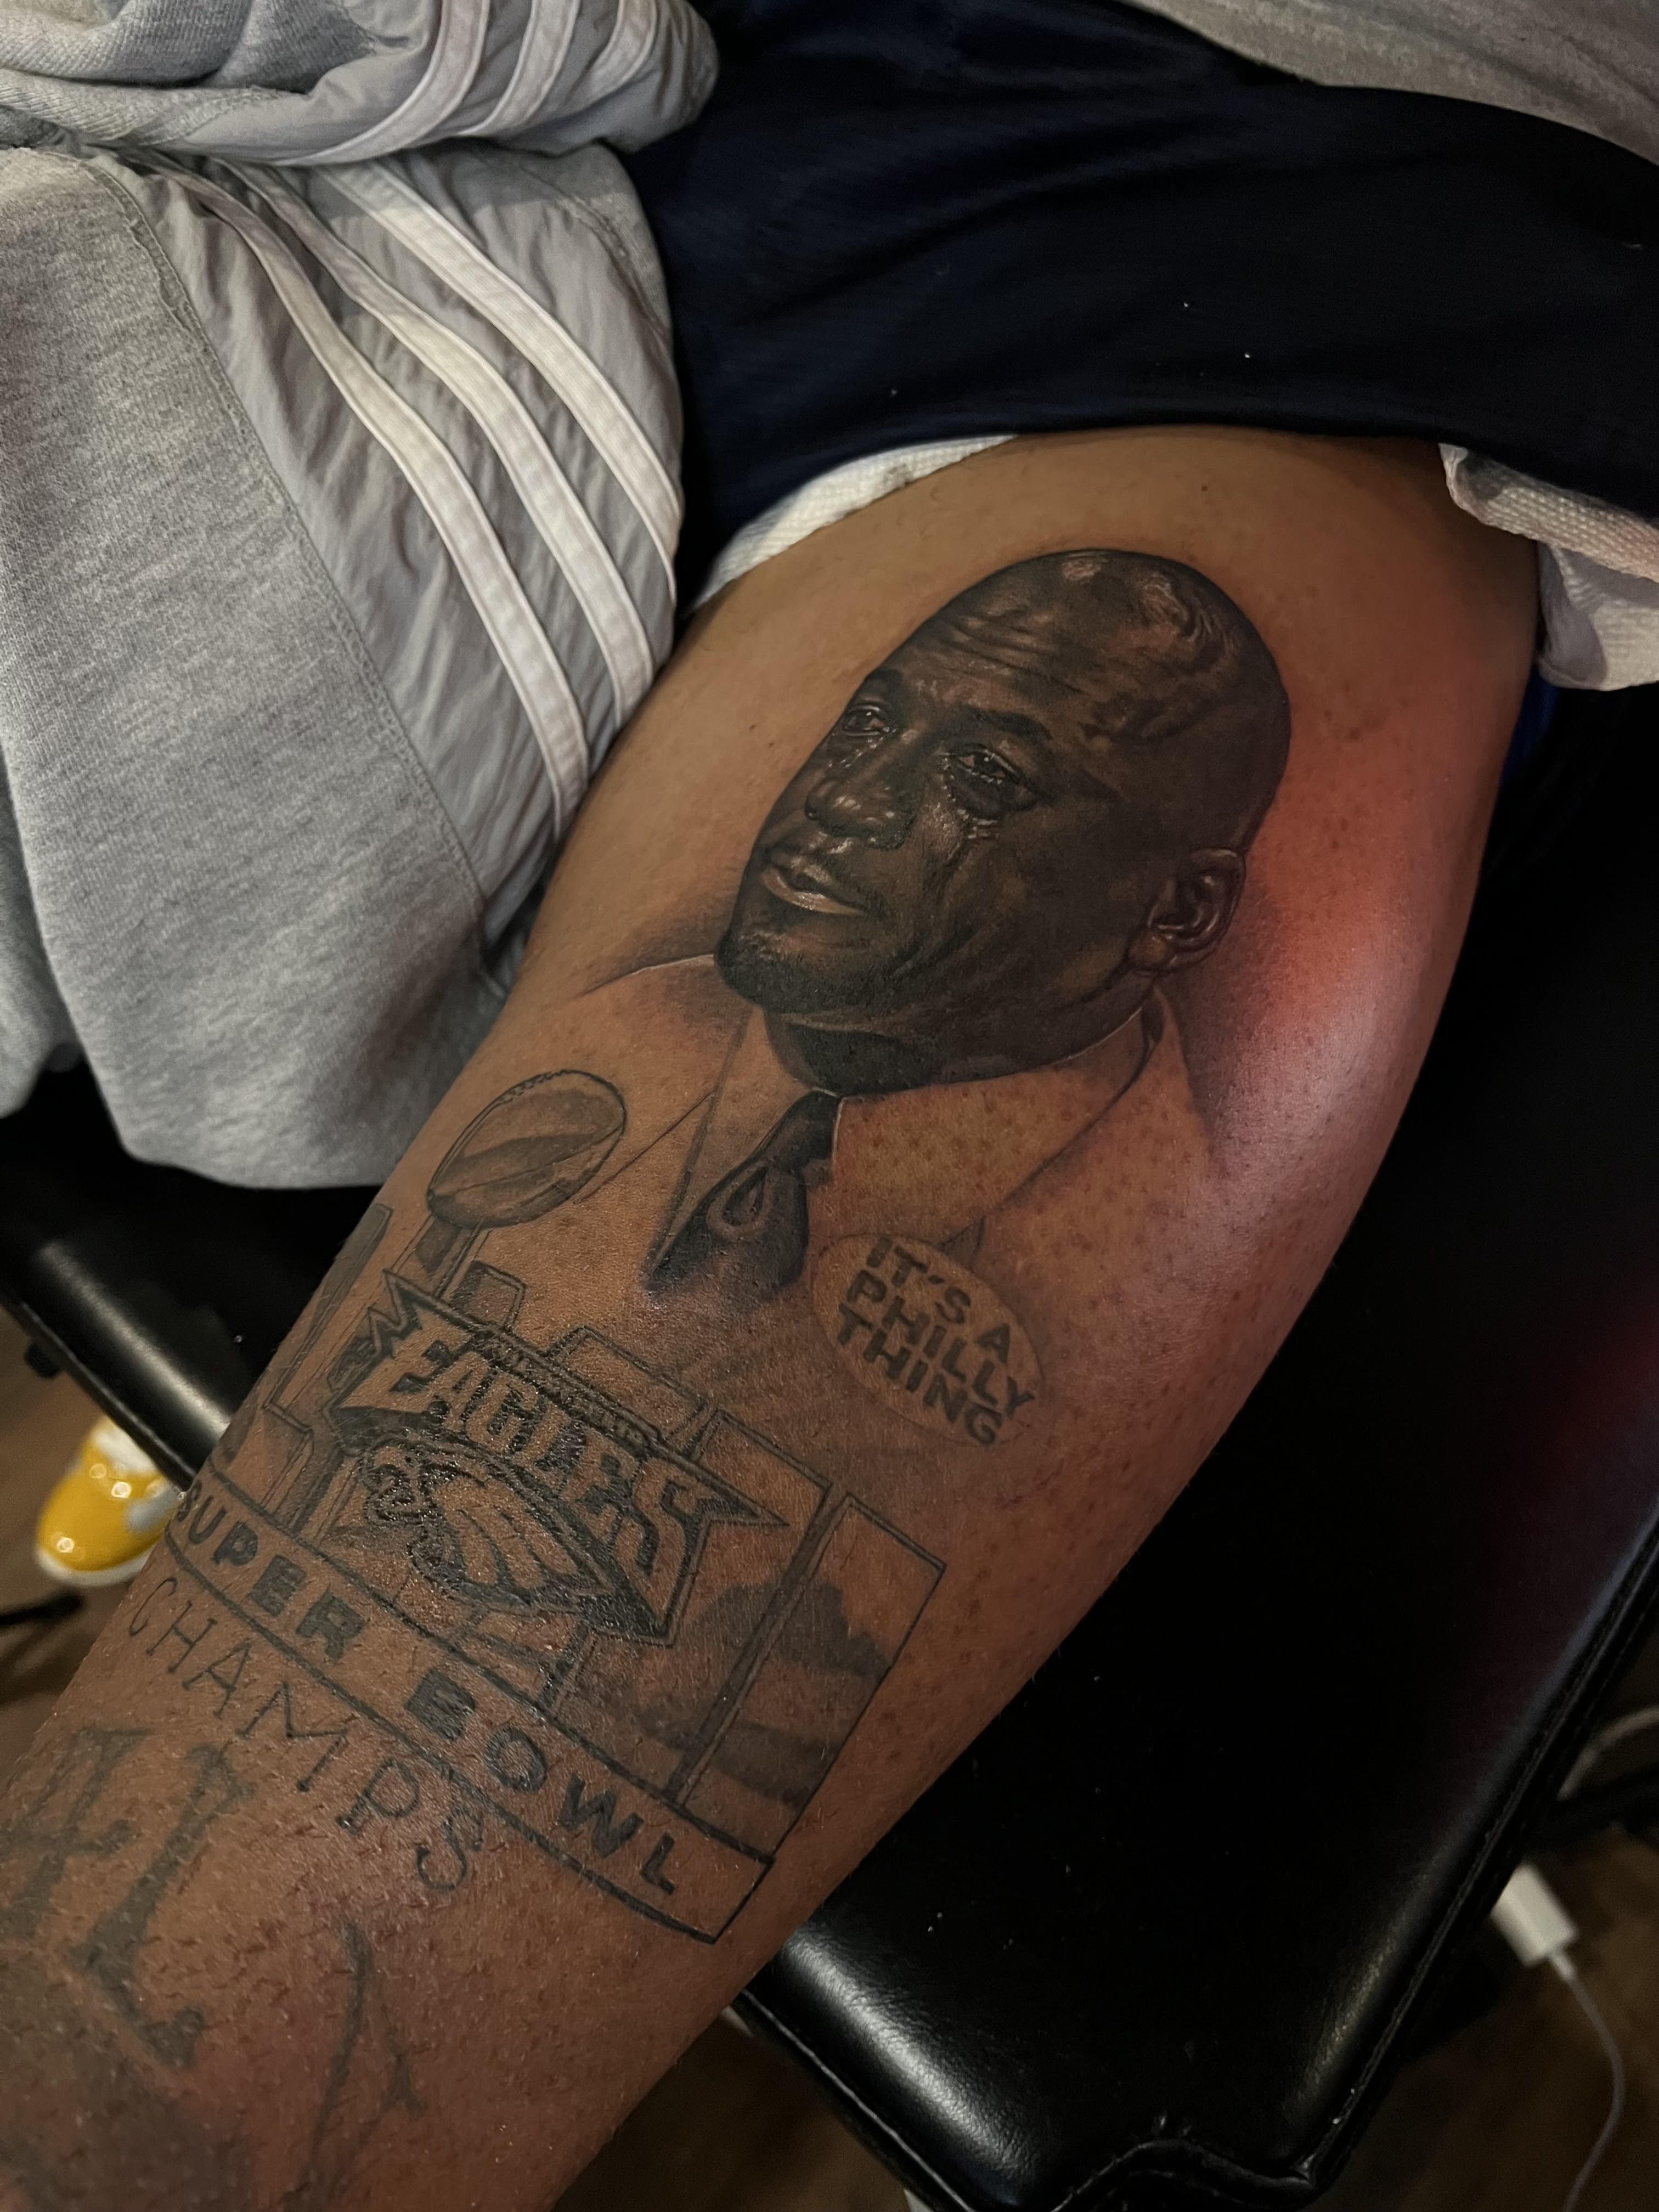 DieHard New England Patriots Fan Tattoos Their 6th Super Bowl Win on His  Back Ahead of the Game